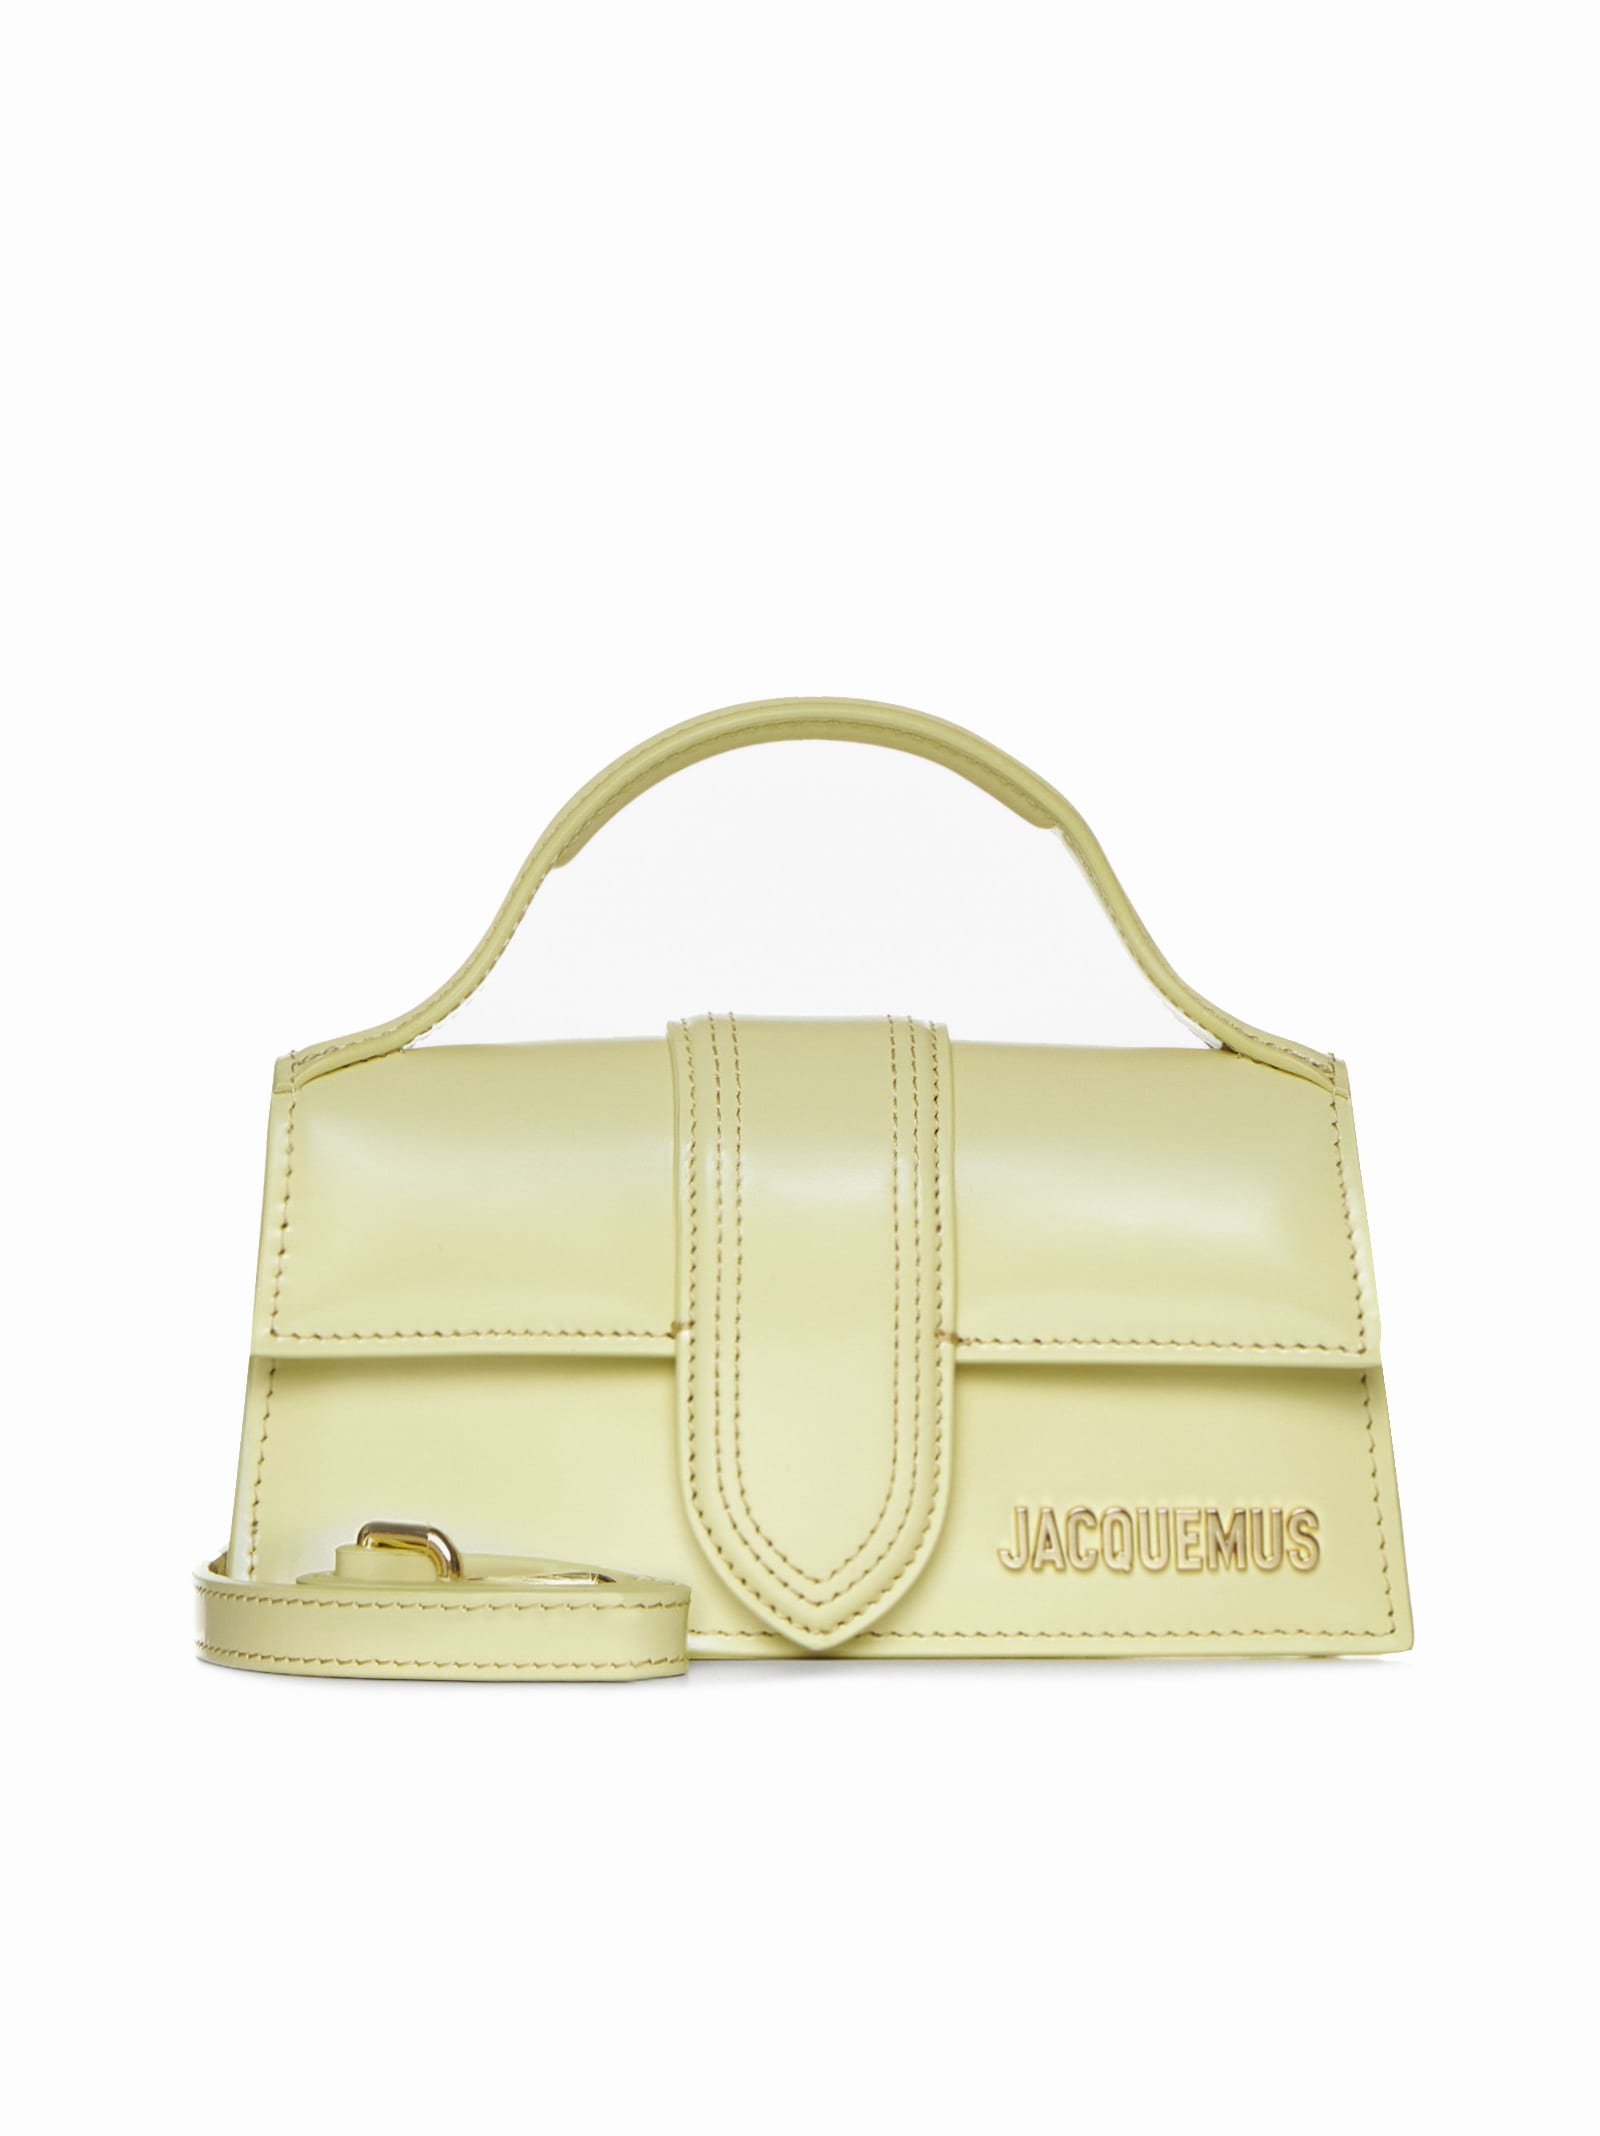 Jacquemus Tote In Neutral